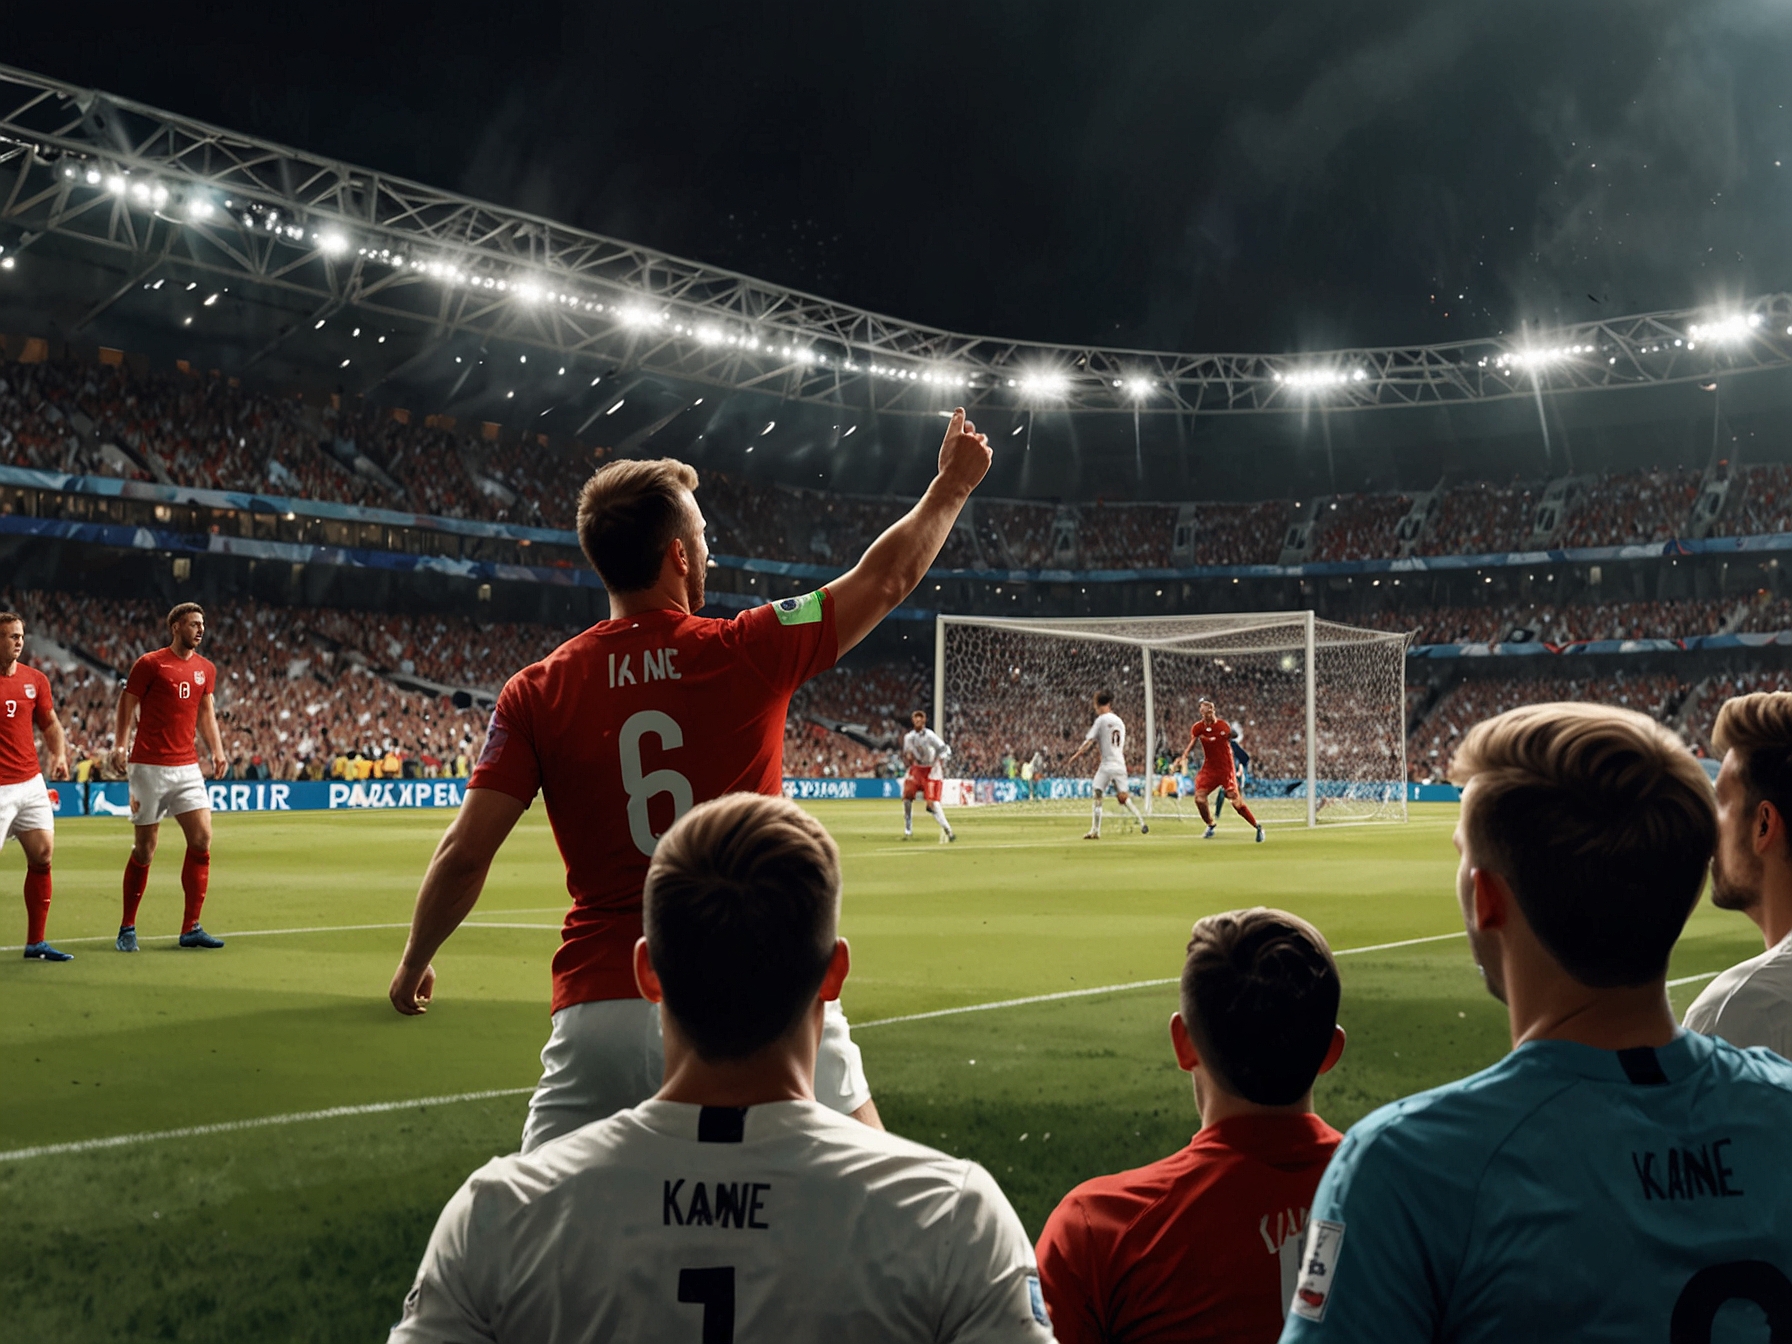 An intense moment from the England vs Denmark match at Euro 2024, showing England's Harry Kane scoring a sensational goal amidst a fierce contest, with fans erupting in celebration.